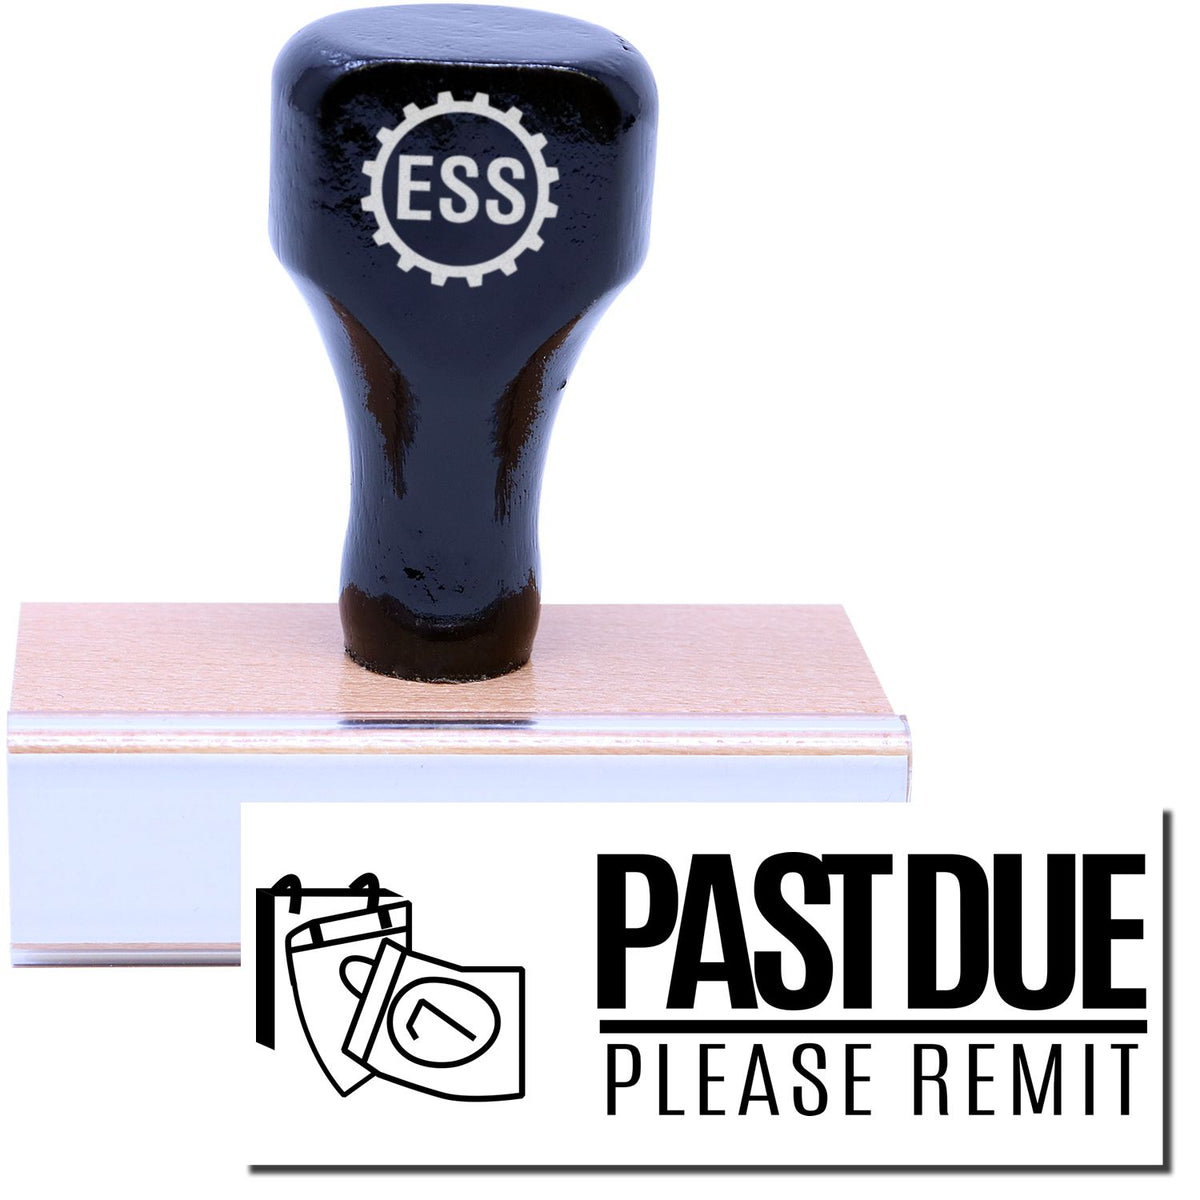 A stock office rubber stamp with a stamped image showing how the text &quot;PAST DUE&quot; in a large bold font (with a line underneath the text) and &quot;PLEASE REMIT&quot; (under a line) in a small font with an icon of a calendar on the left side is displayed after stamping.